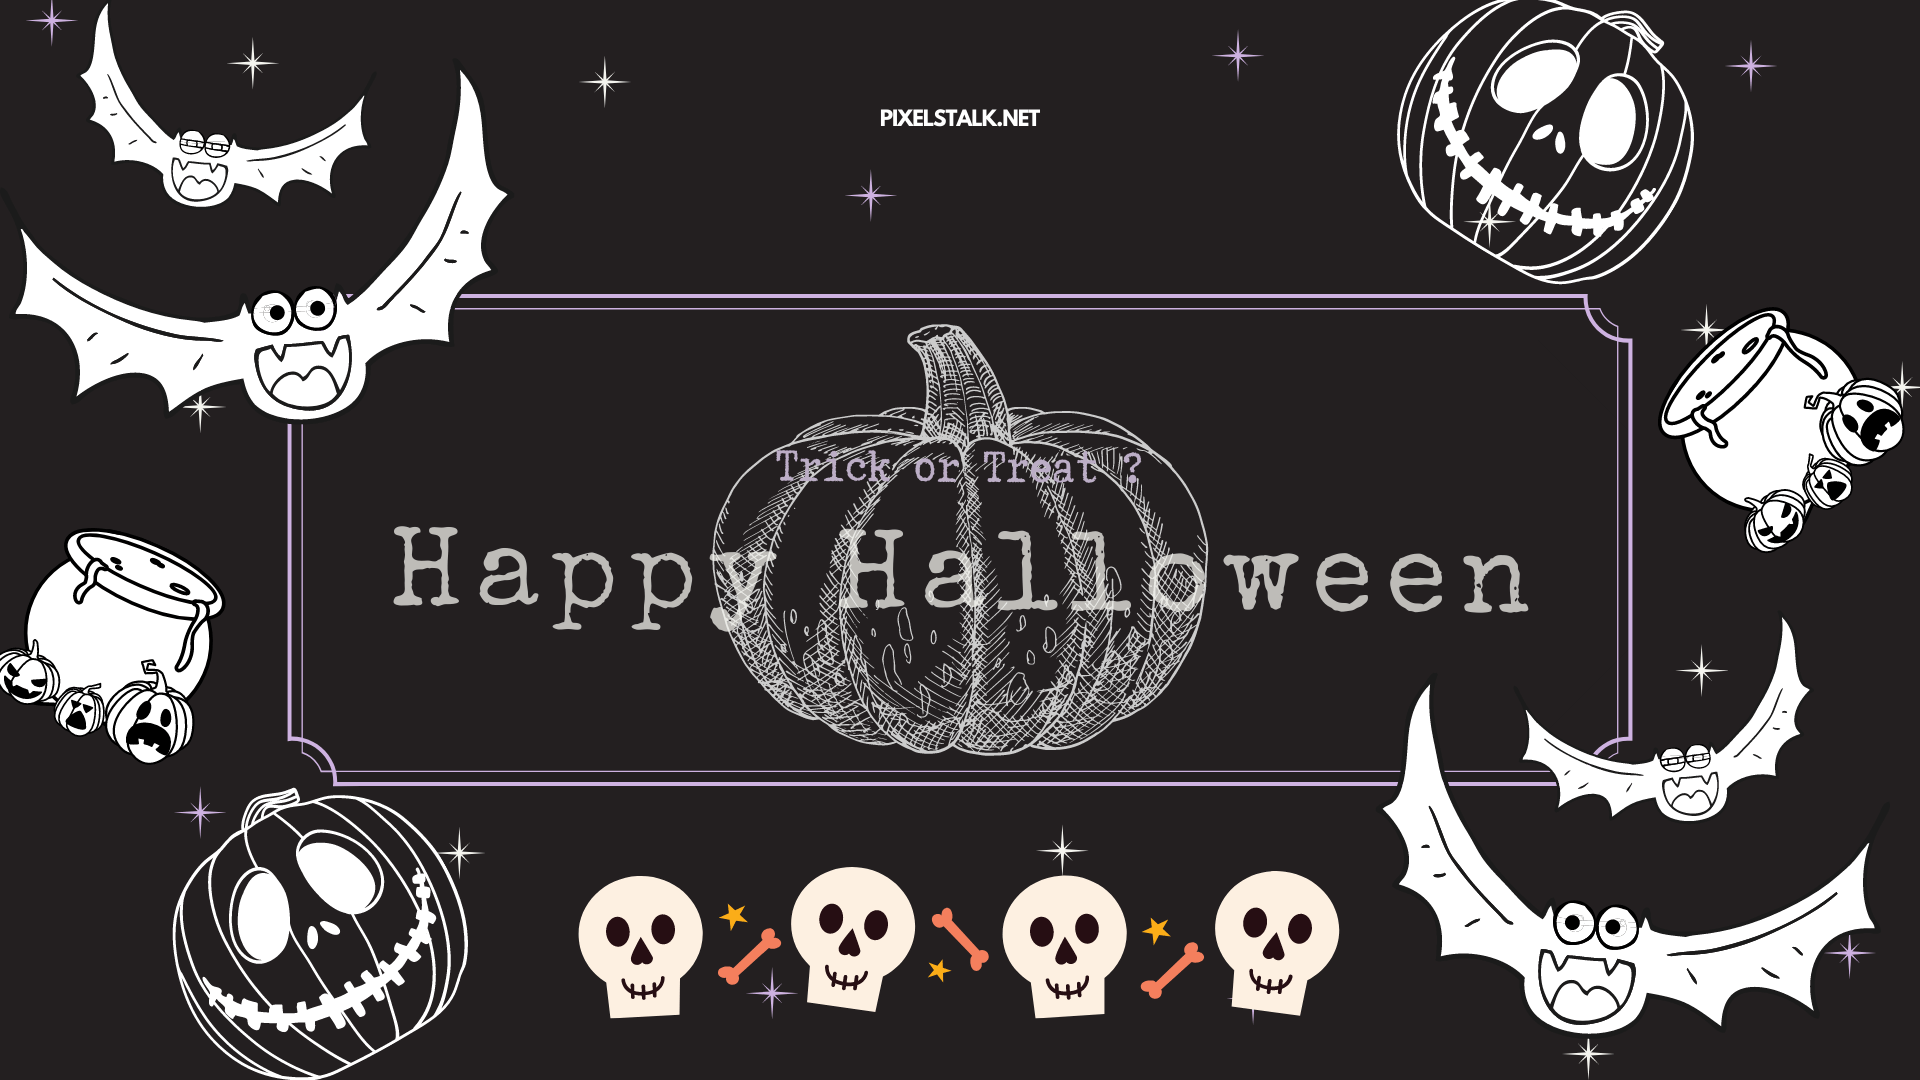 Halloween background with bats, skulls, pumpkins, and a trick or treat banner - Creepy, Halloween, spooky